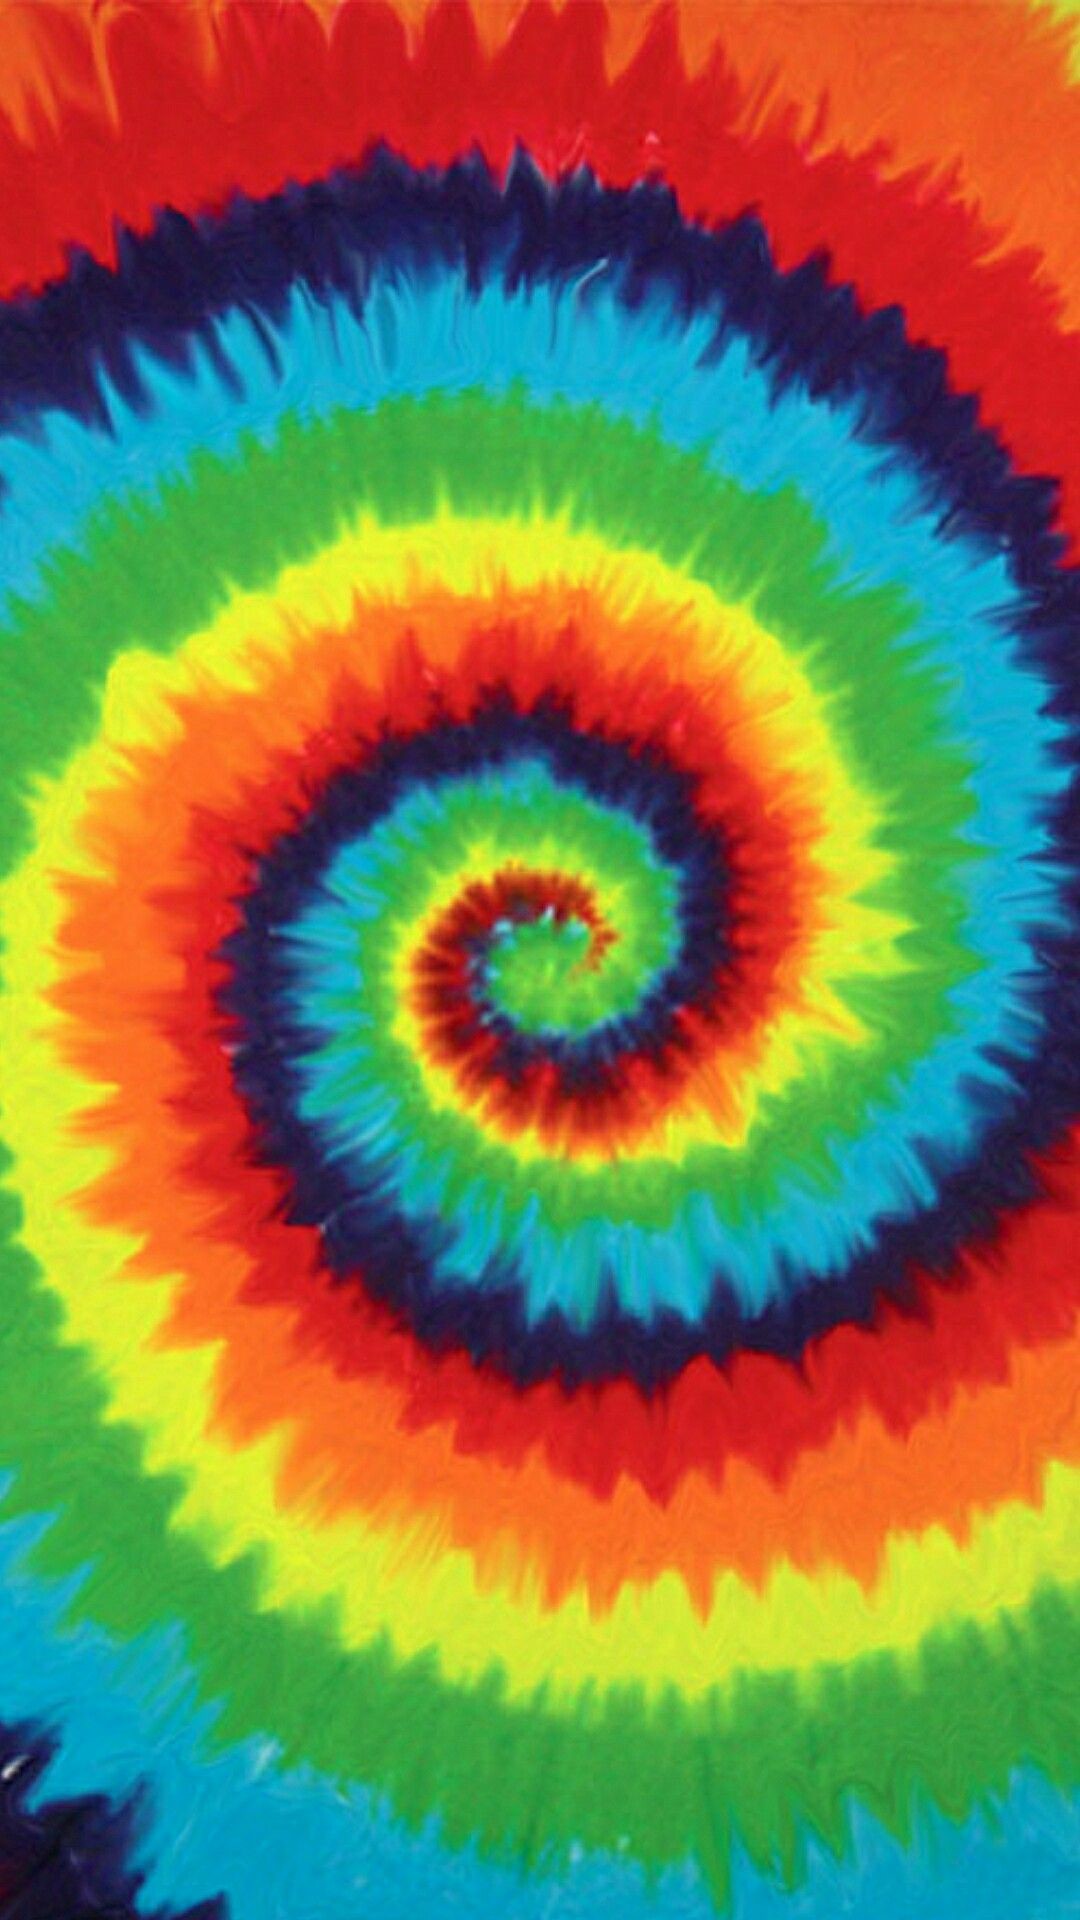 1080x1920, Tie Dyed, Spiral, Psychedelic, Wallpaper, - Tie Dye Spiral Painting - HD Wallpaper 